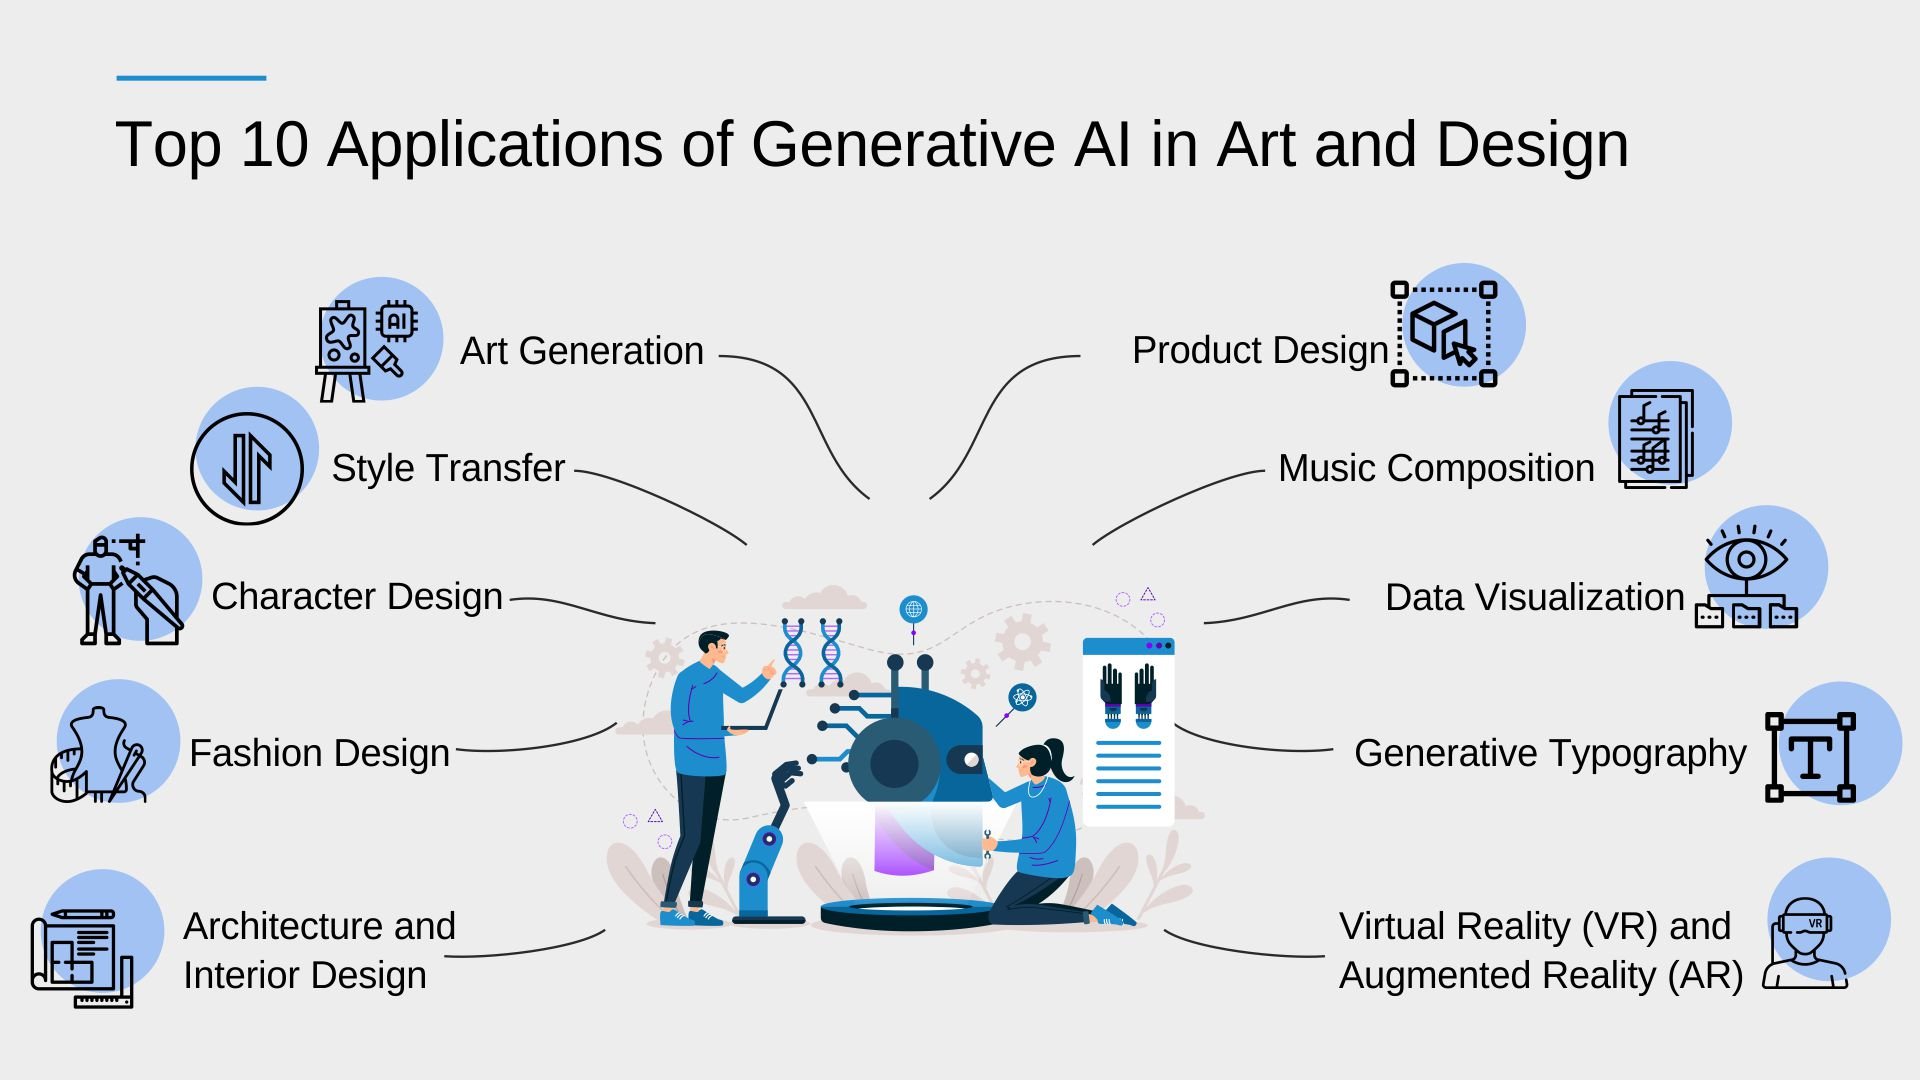 Top 10 Applications of Generative AI in Art and Design-Infographic